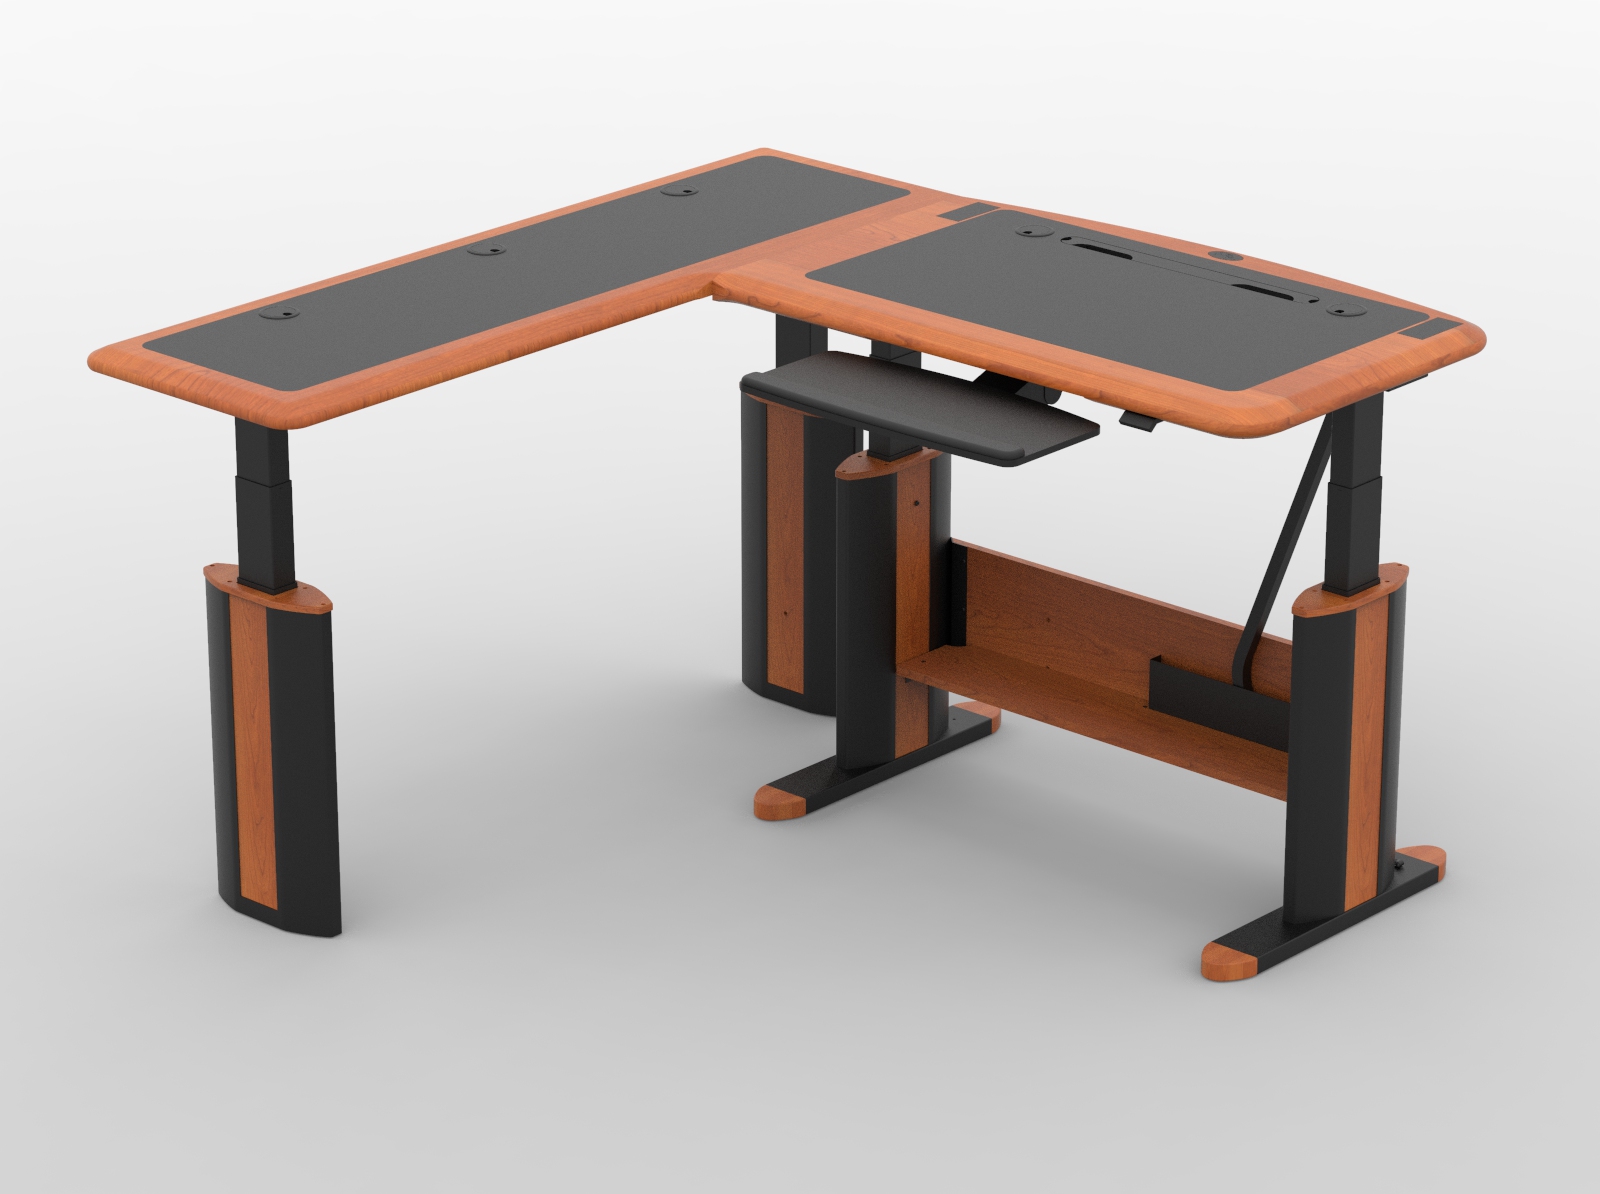 Feet for LINAK lifting columns  Stable base for sit-stand desk